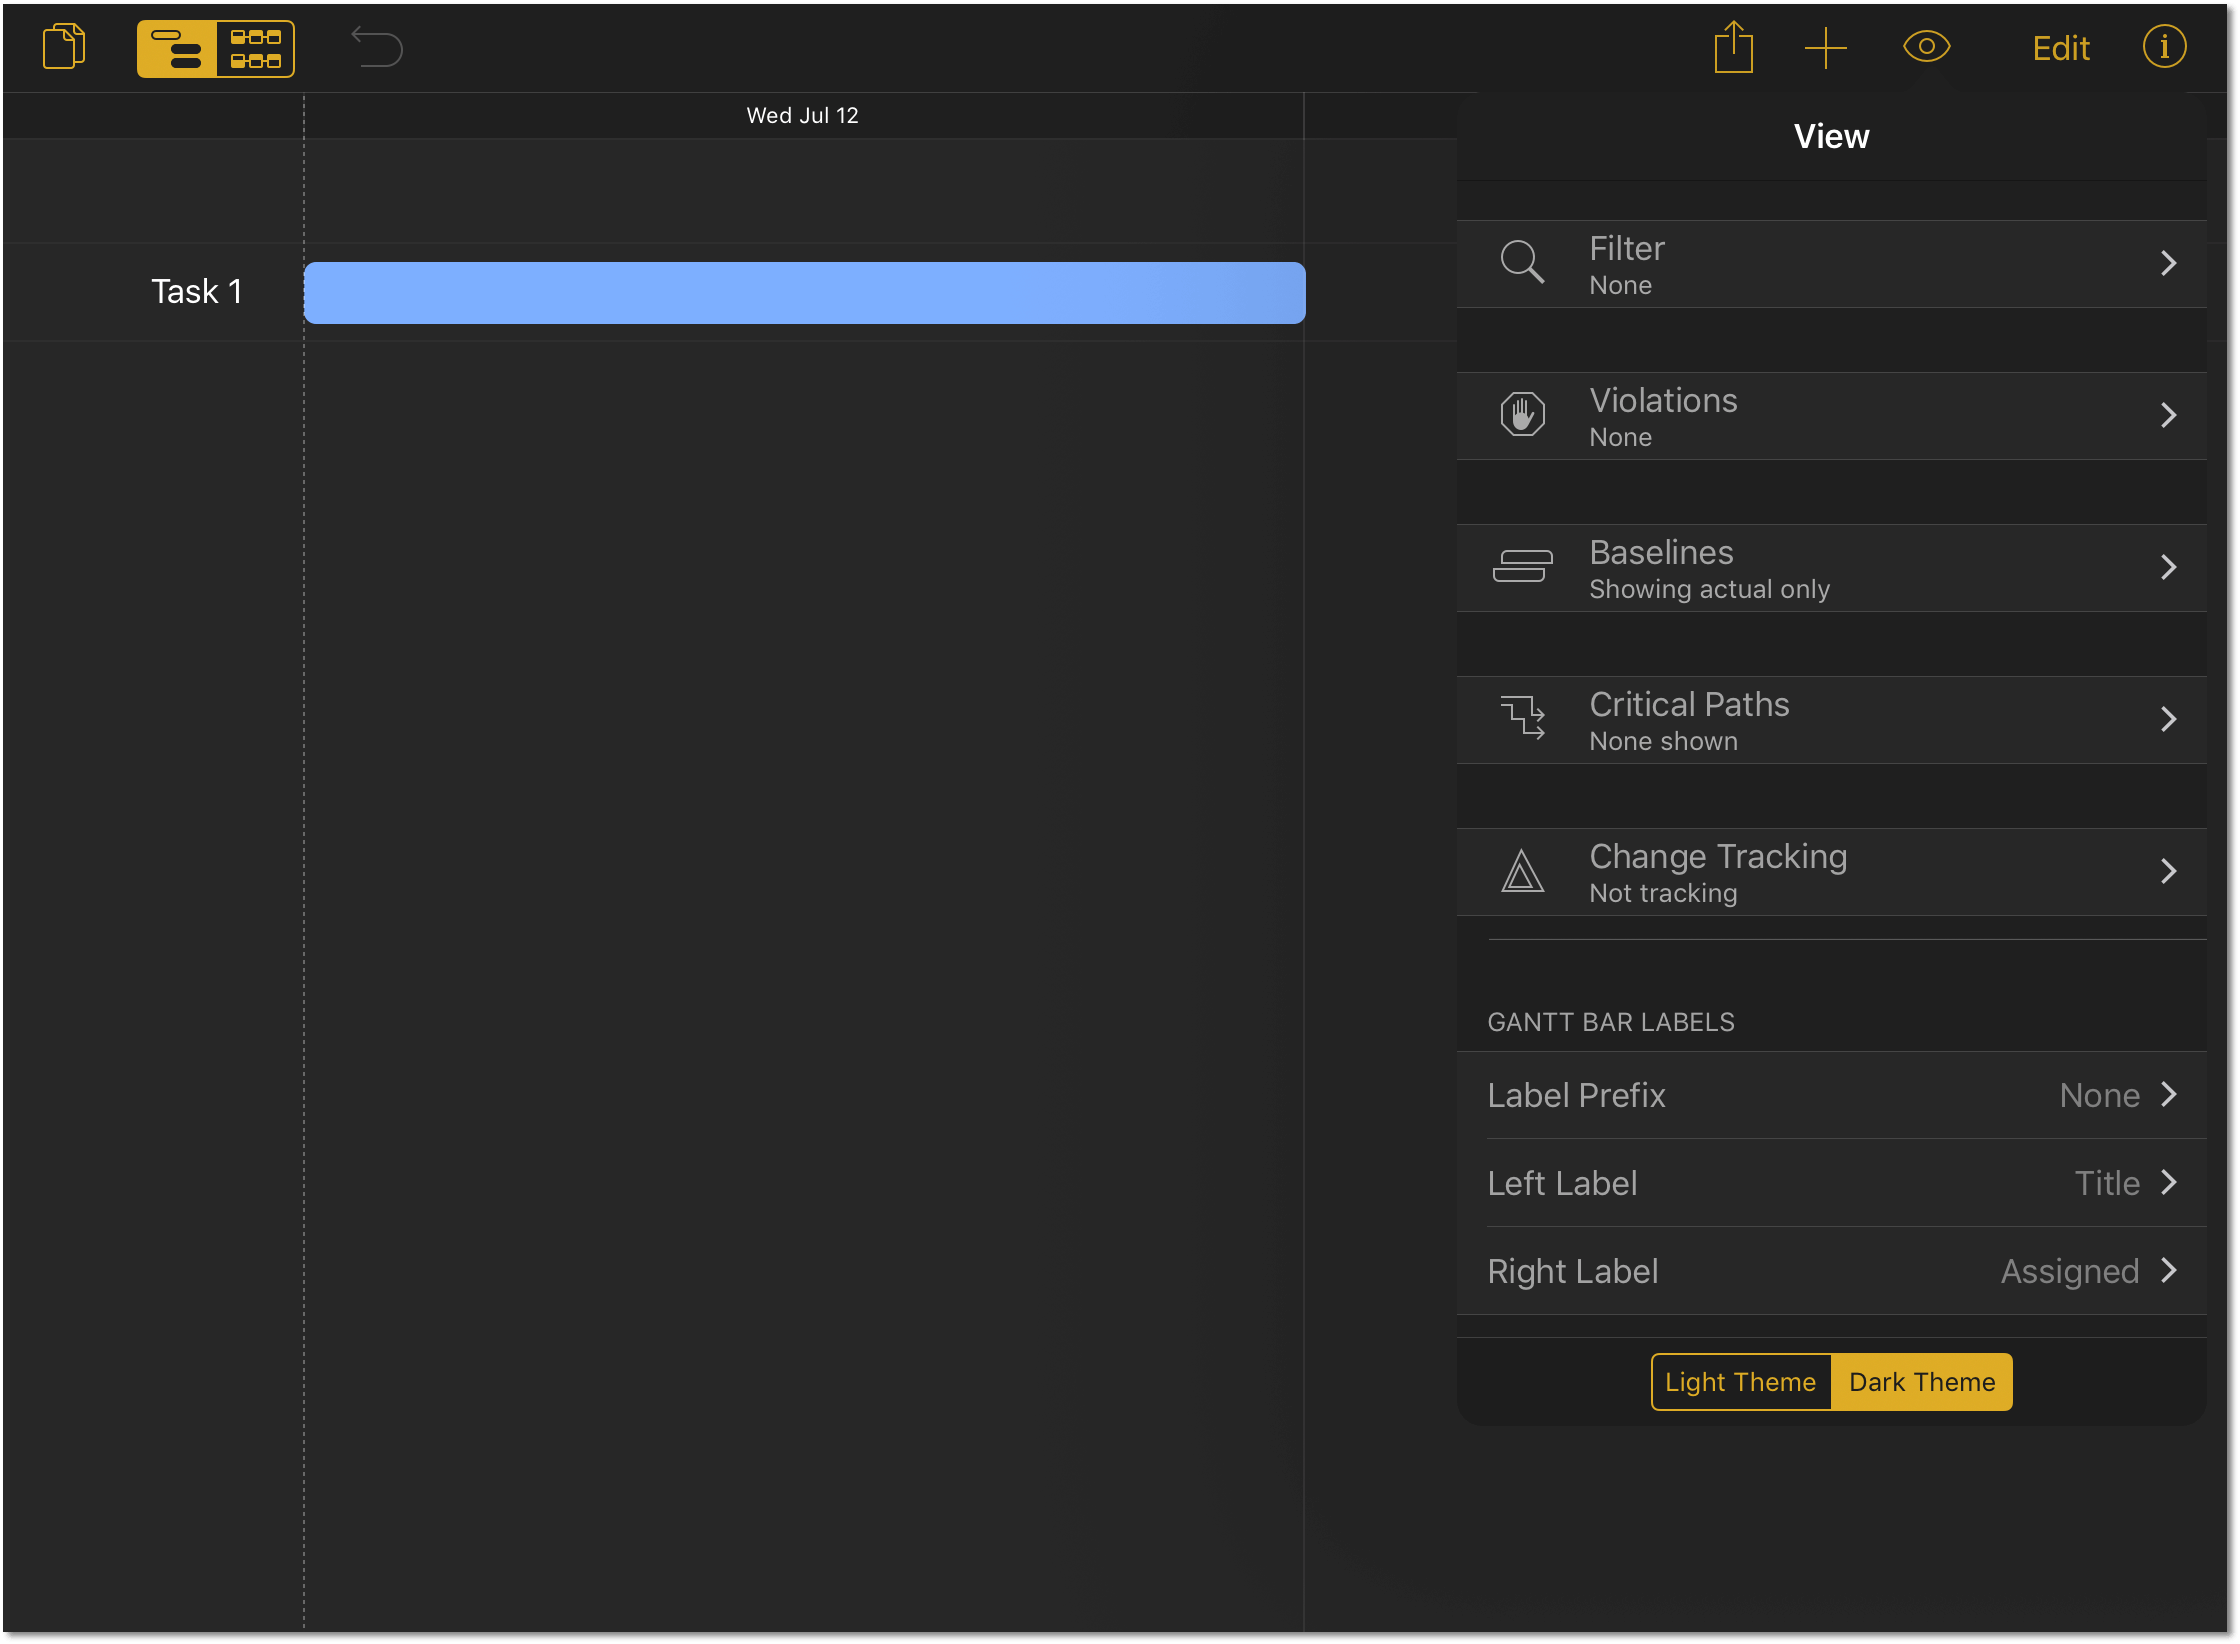 The Project Editor with the View menu open